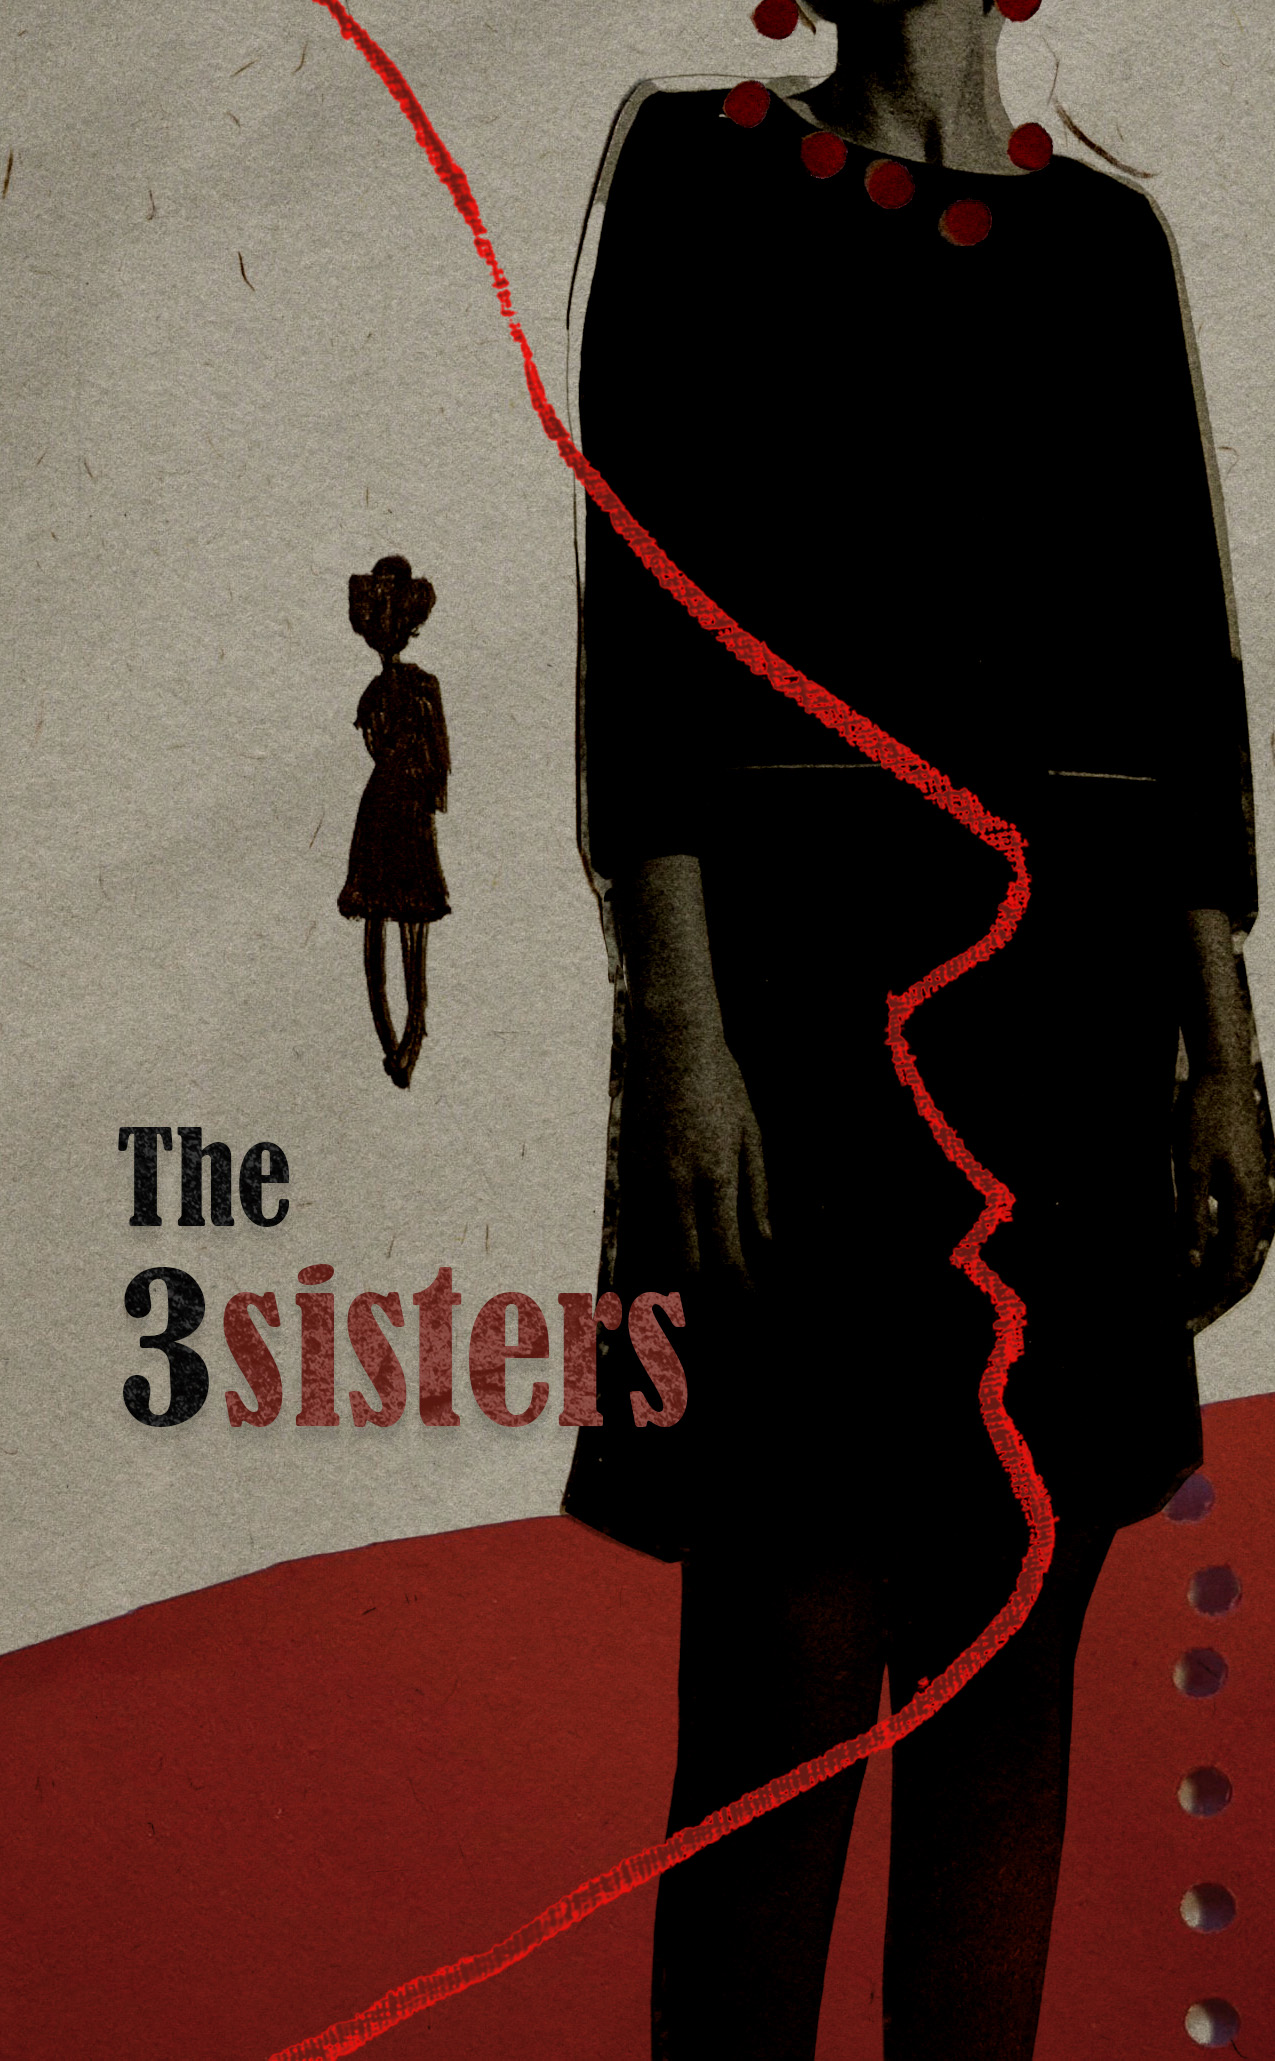 A photograph of a woman at the front with the silhouette of a girl behind and a red line profile of a woman at the front. The text The 3 sisters is at the front. The image is predominantly red and black with a paper texture background